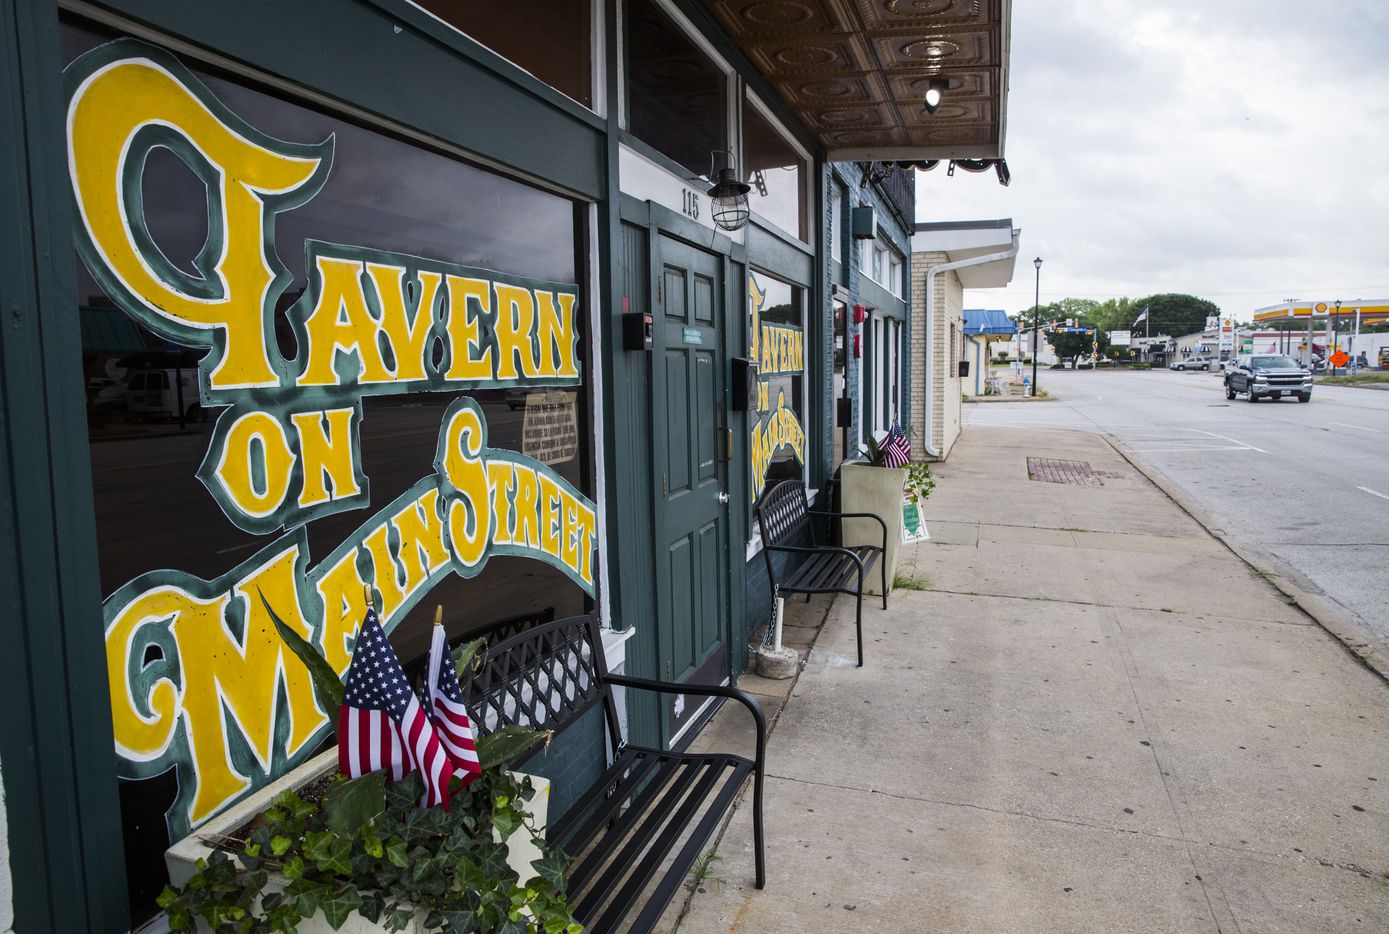 Tavern on Main Street is seen on 100 block of East Main Street in old downtown Richardson, an area set for redevelopment.